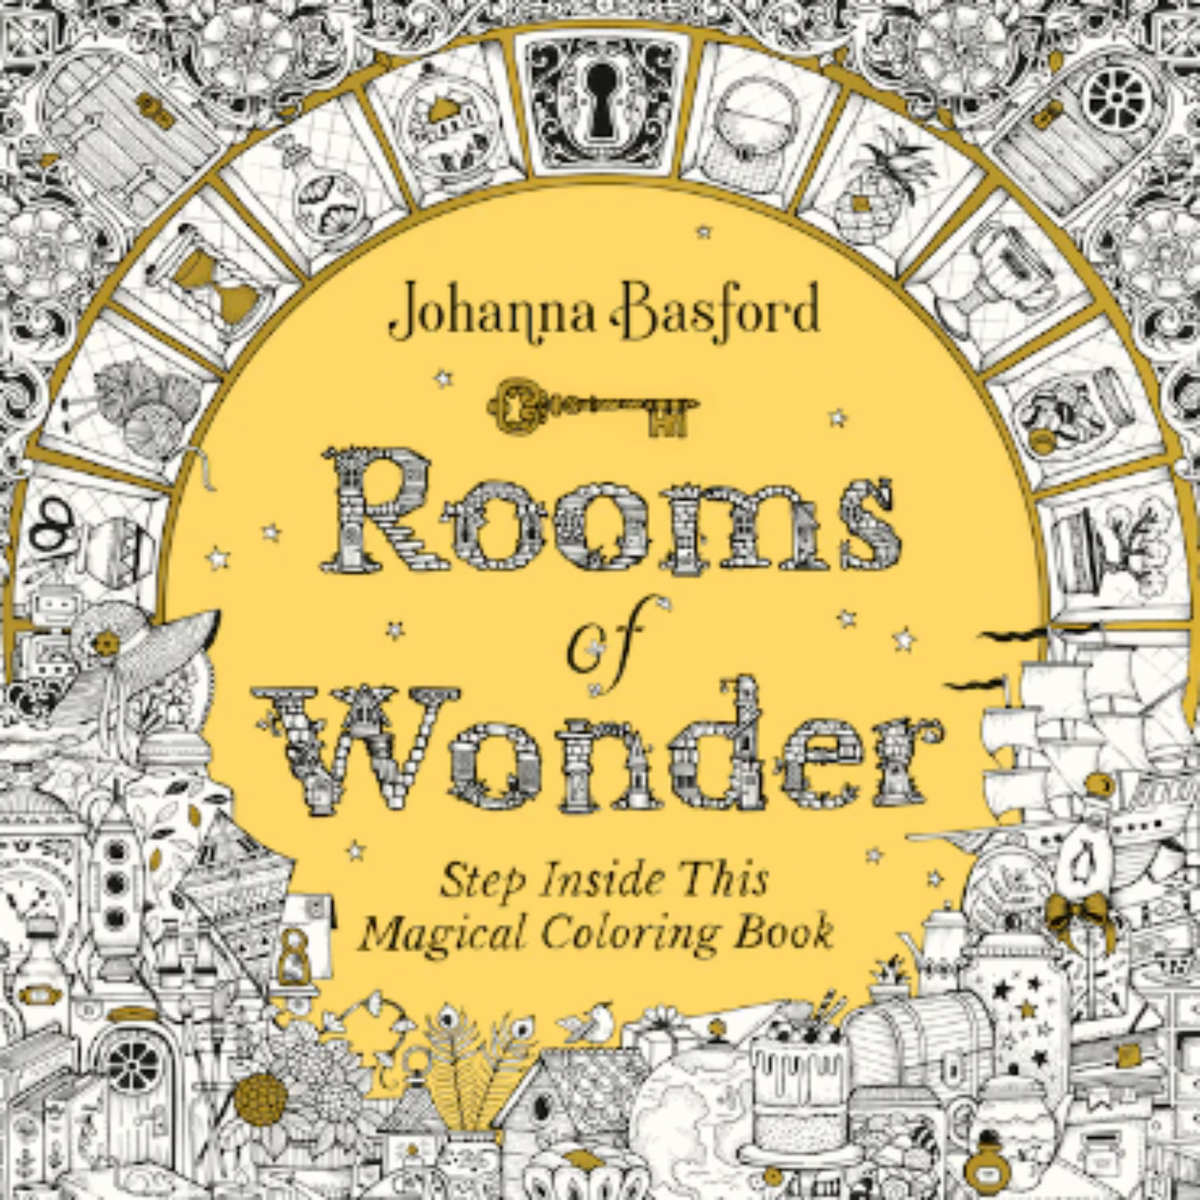 Rooms Of Wonder: Step Inside This Magical Coloring Book